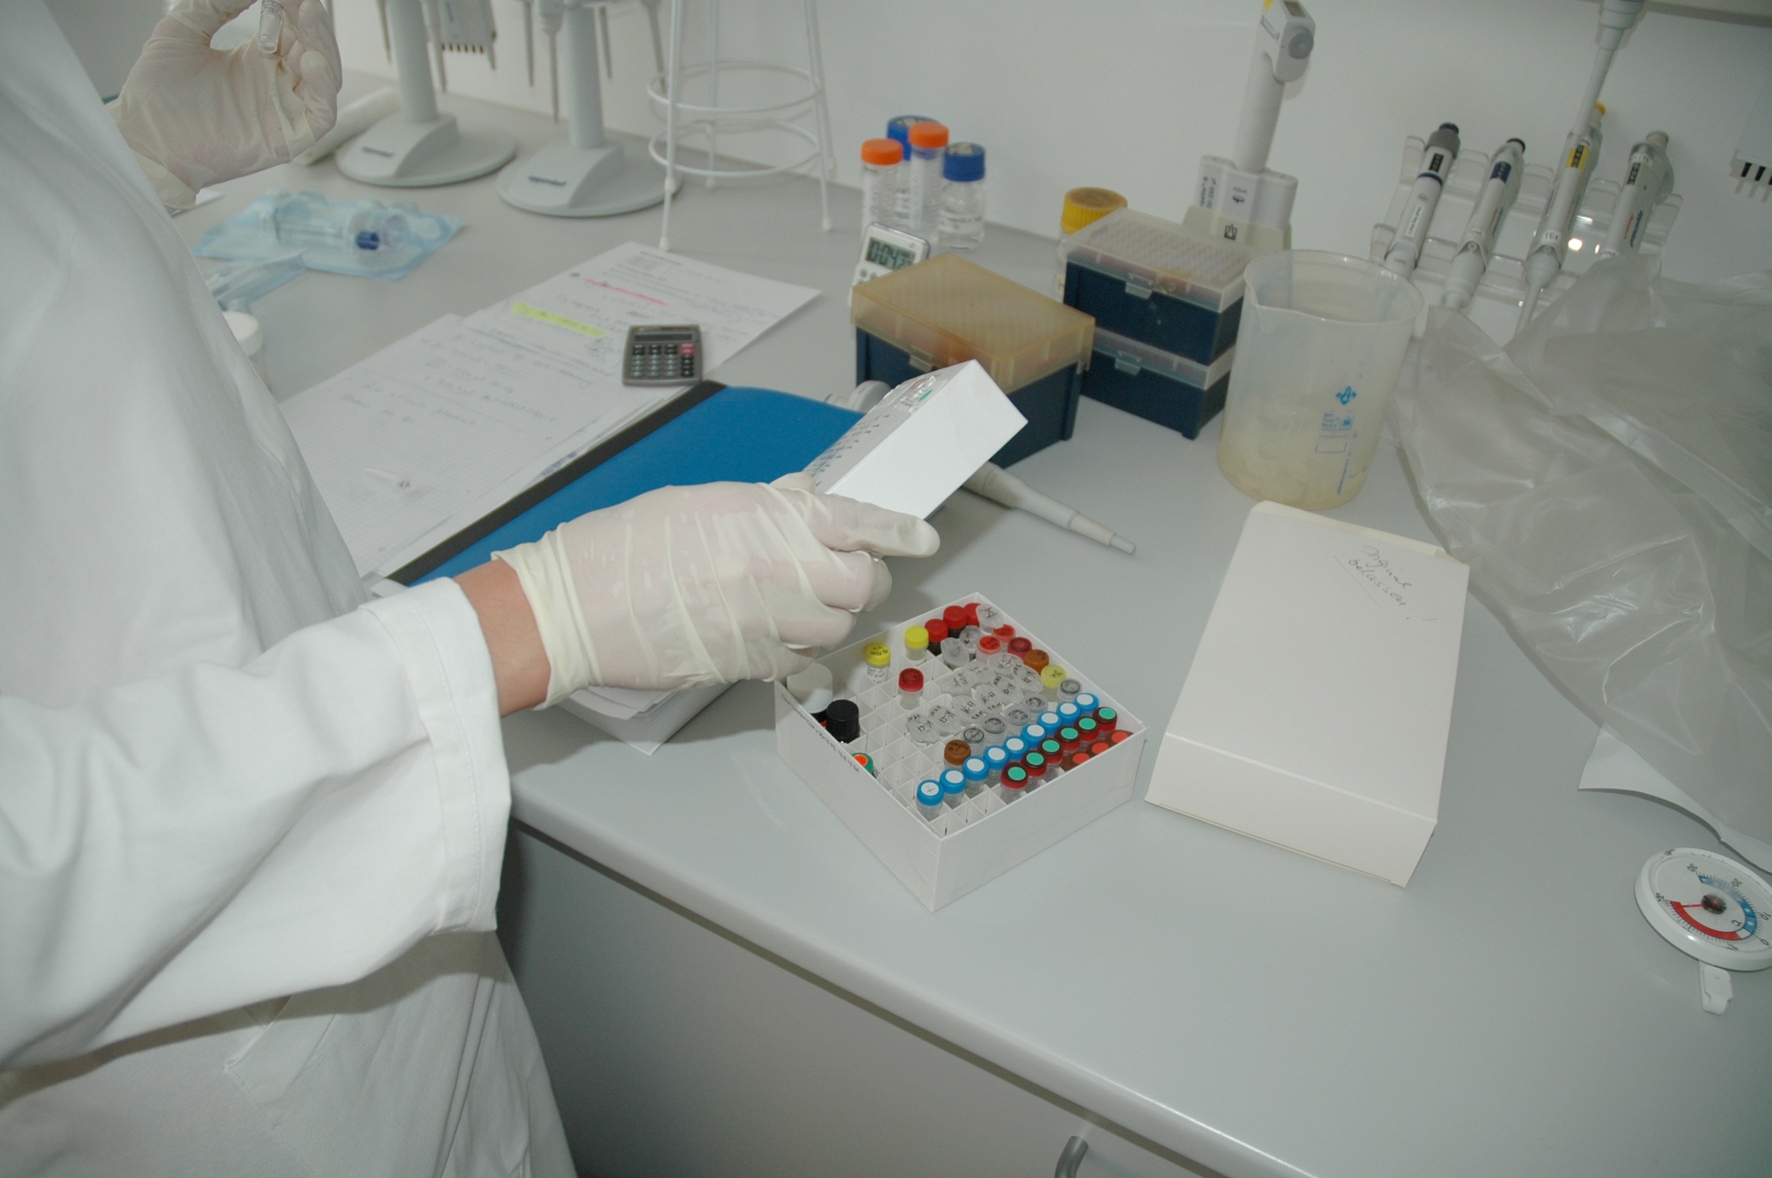 View of a laboratory work place with a broad range of laboratory utensils in which a person (on the left, wearing a white lab coat) is working with frozen samples.